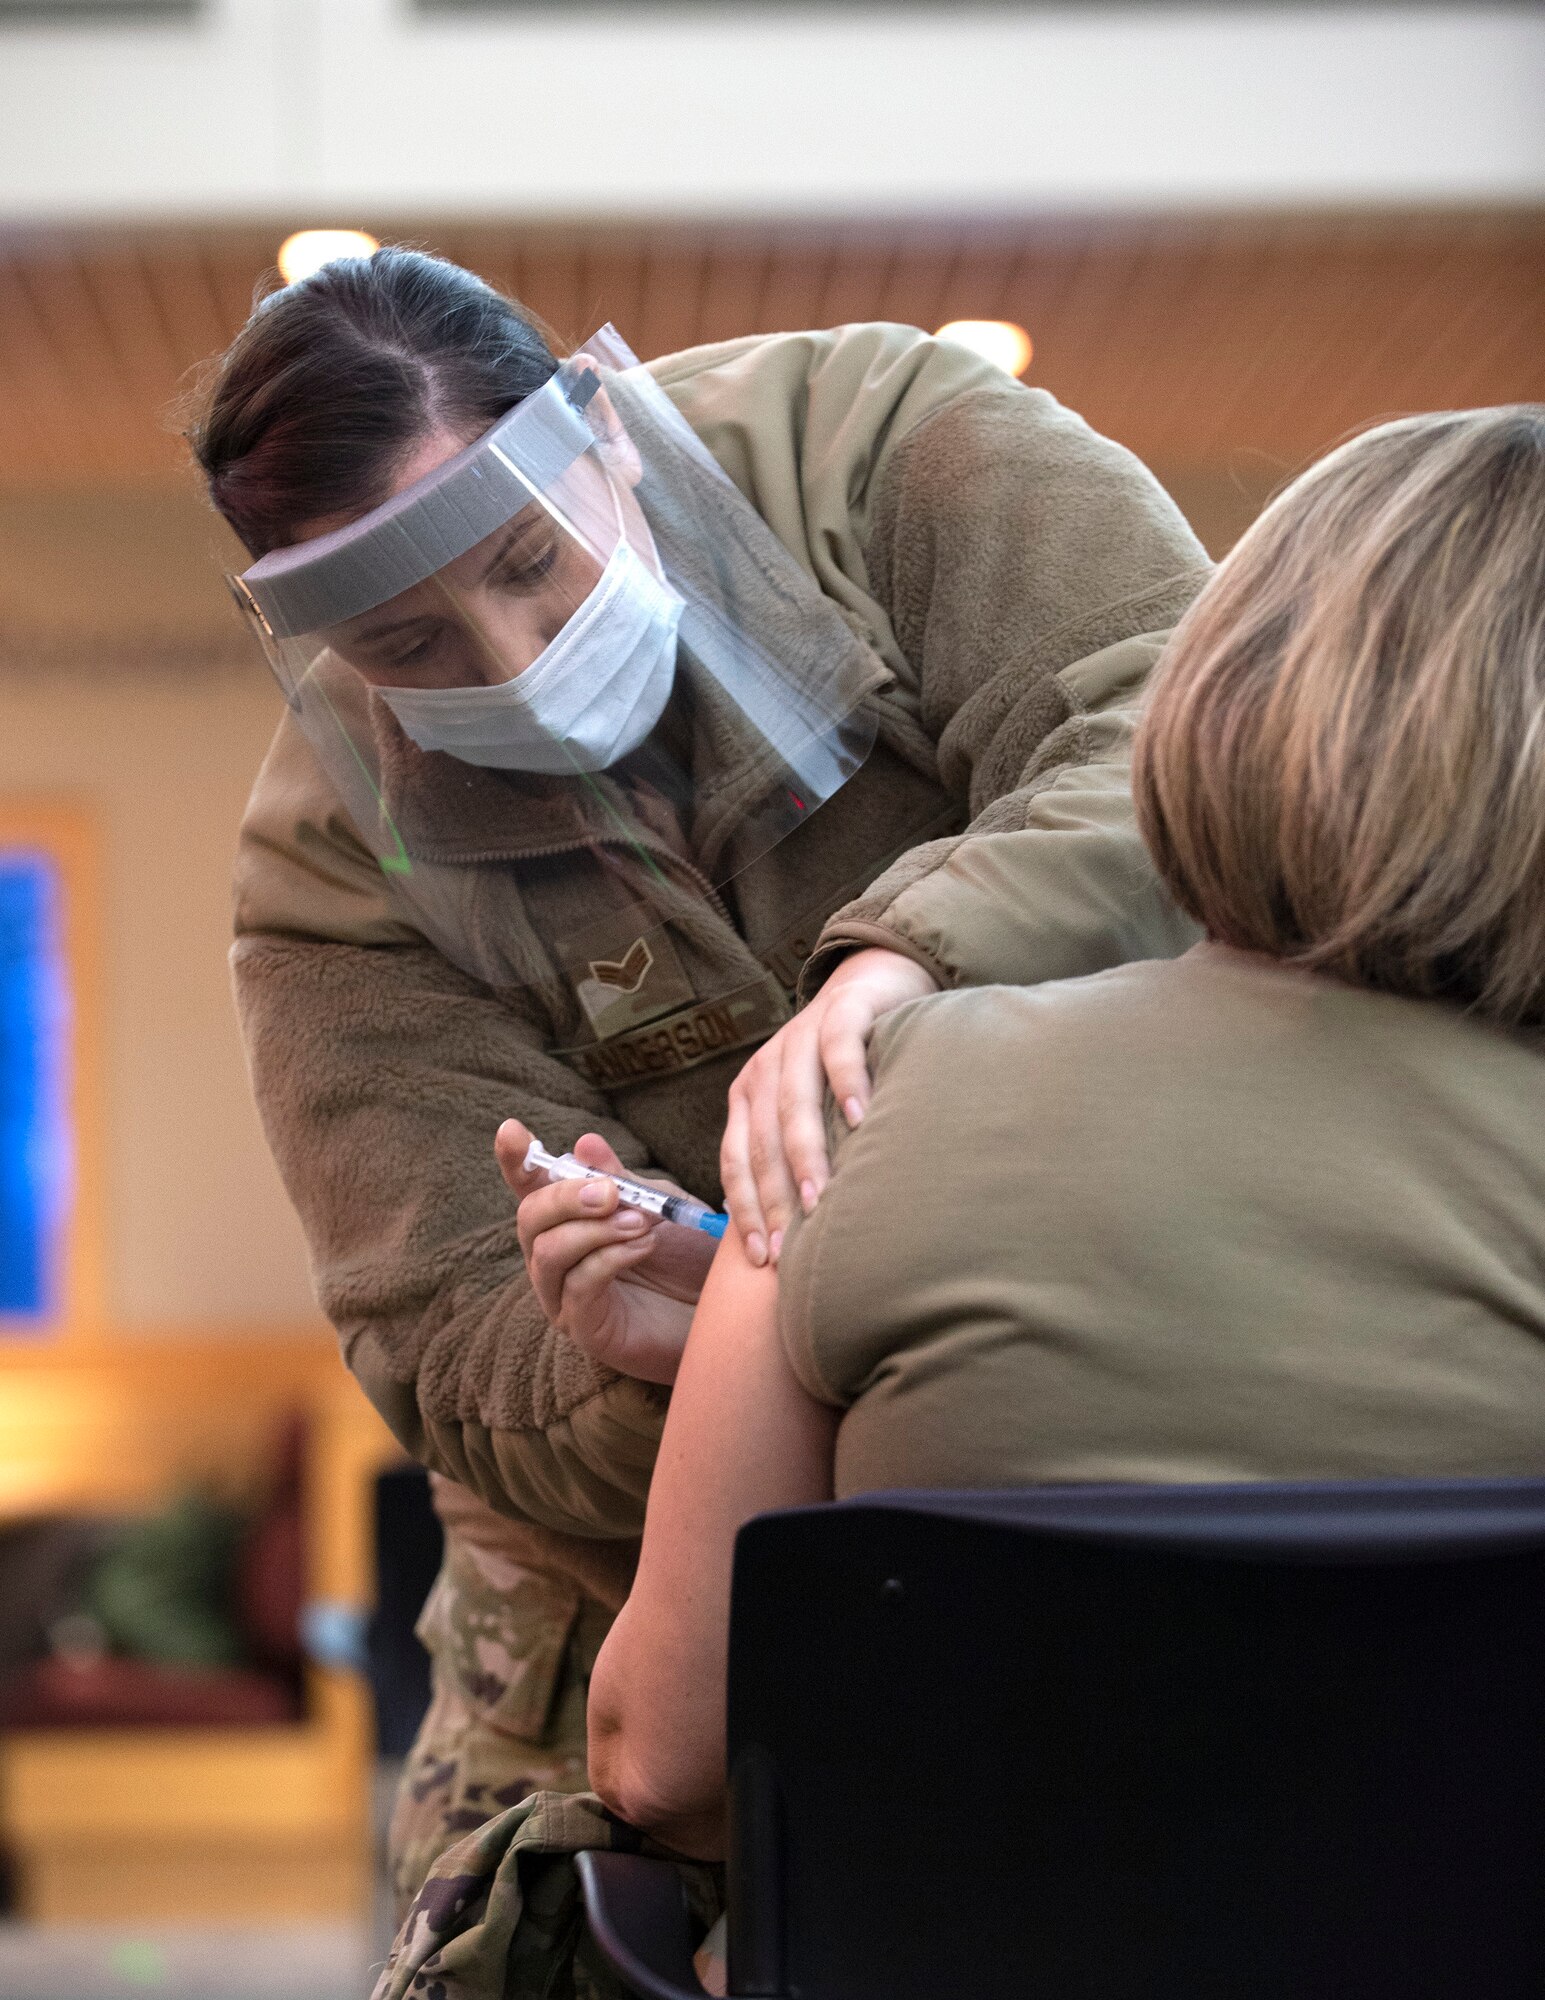 U.S. Air Force Airmen from the 133rd Airlift Wing received their first dose of the Moderna COVID-19 vaccine in St. Paul, Minn., Jan. 8, 2021.